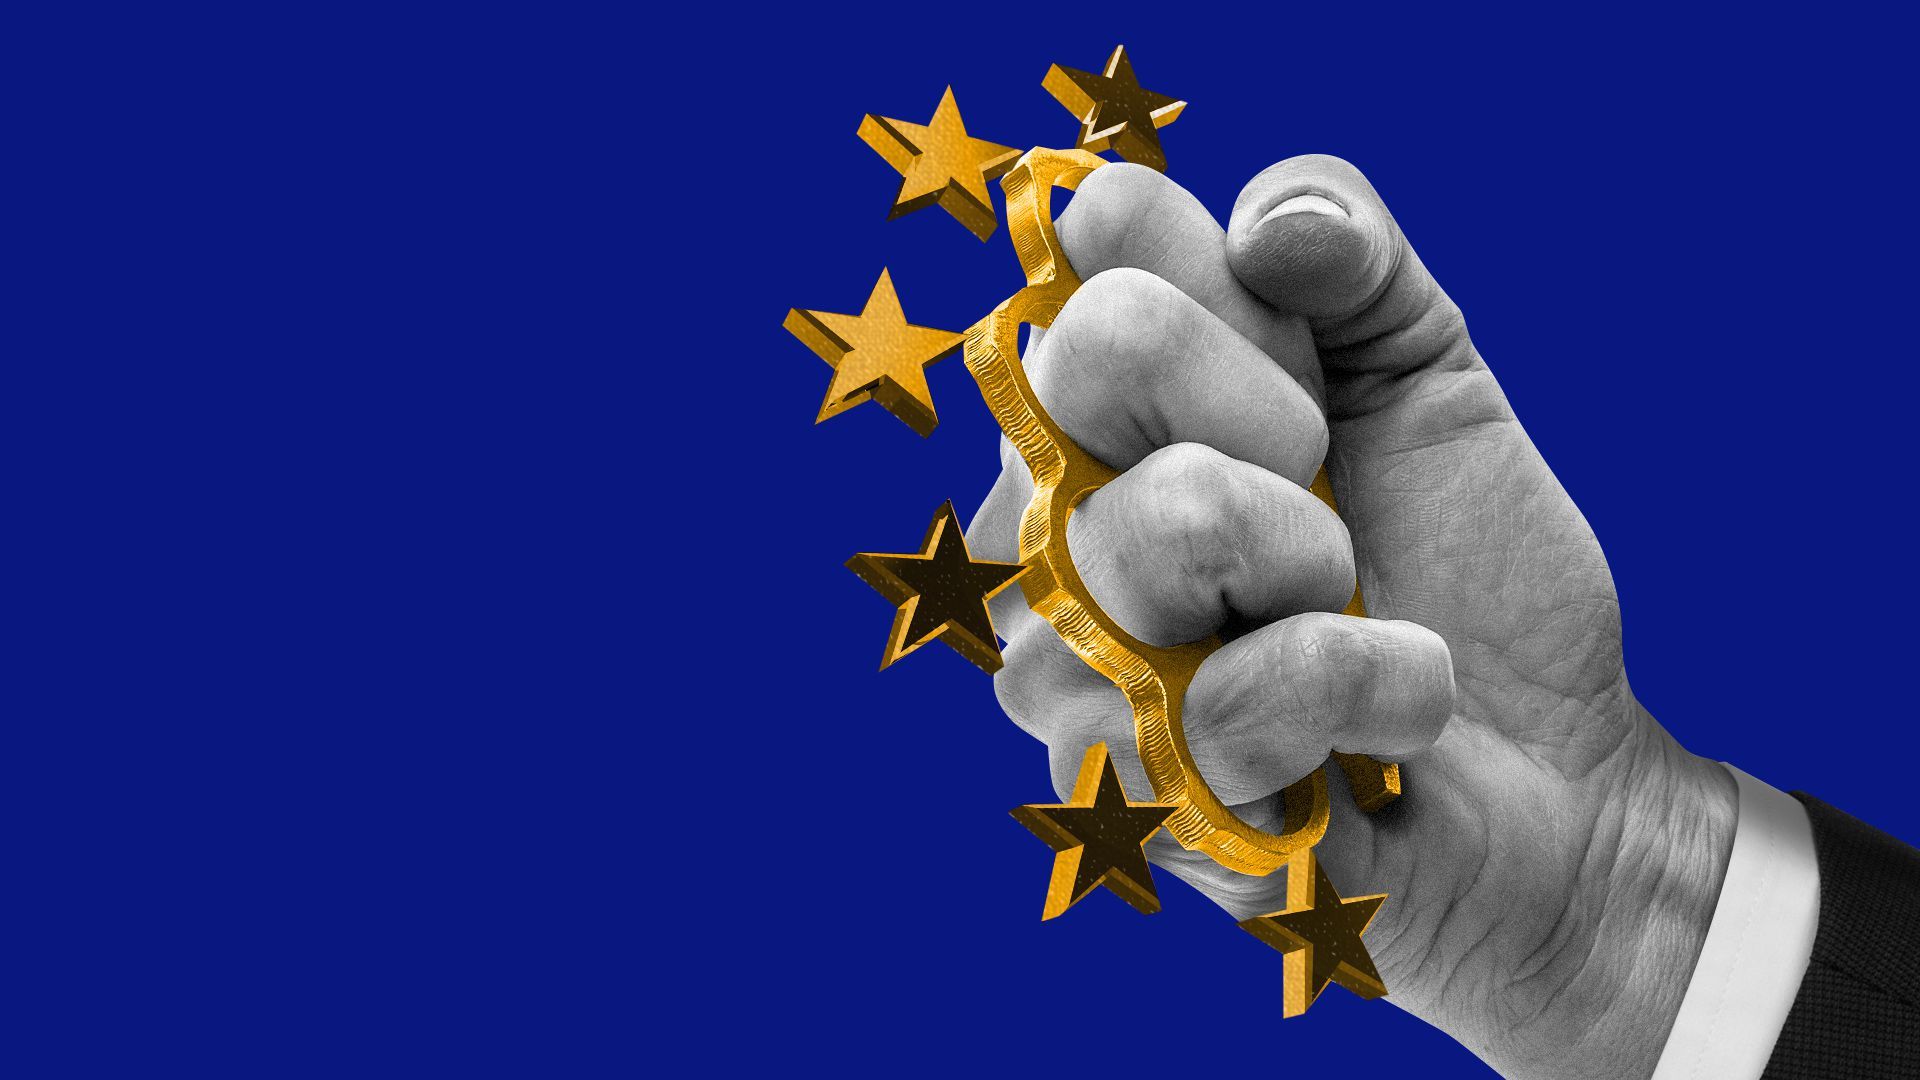 Illustration of a hand with the stars of the EU flag stylized as brass knuckles. 